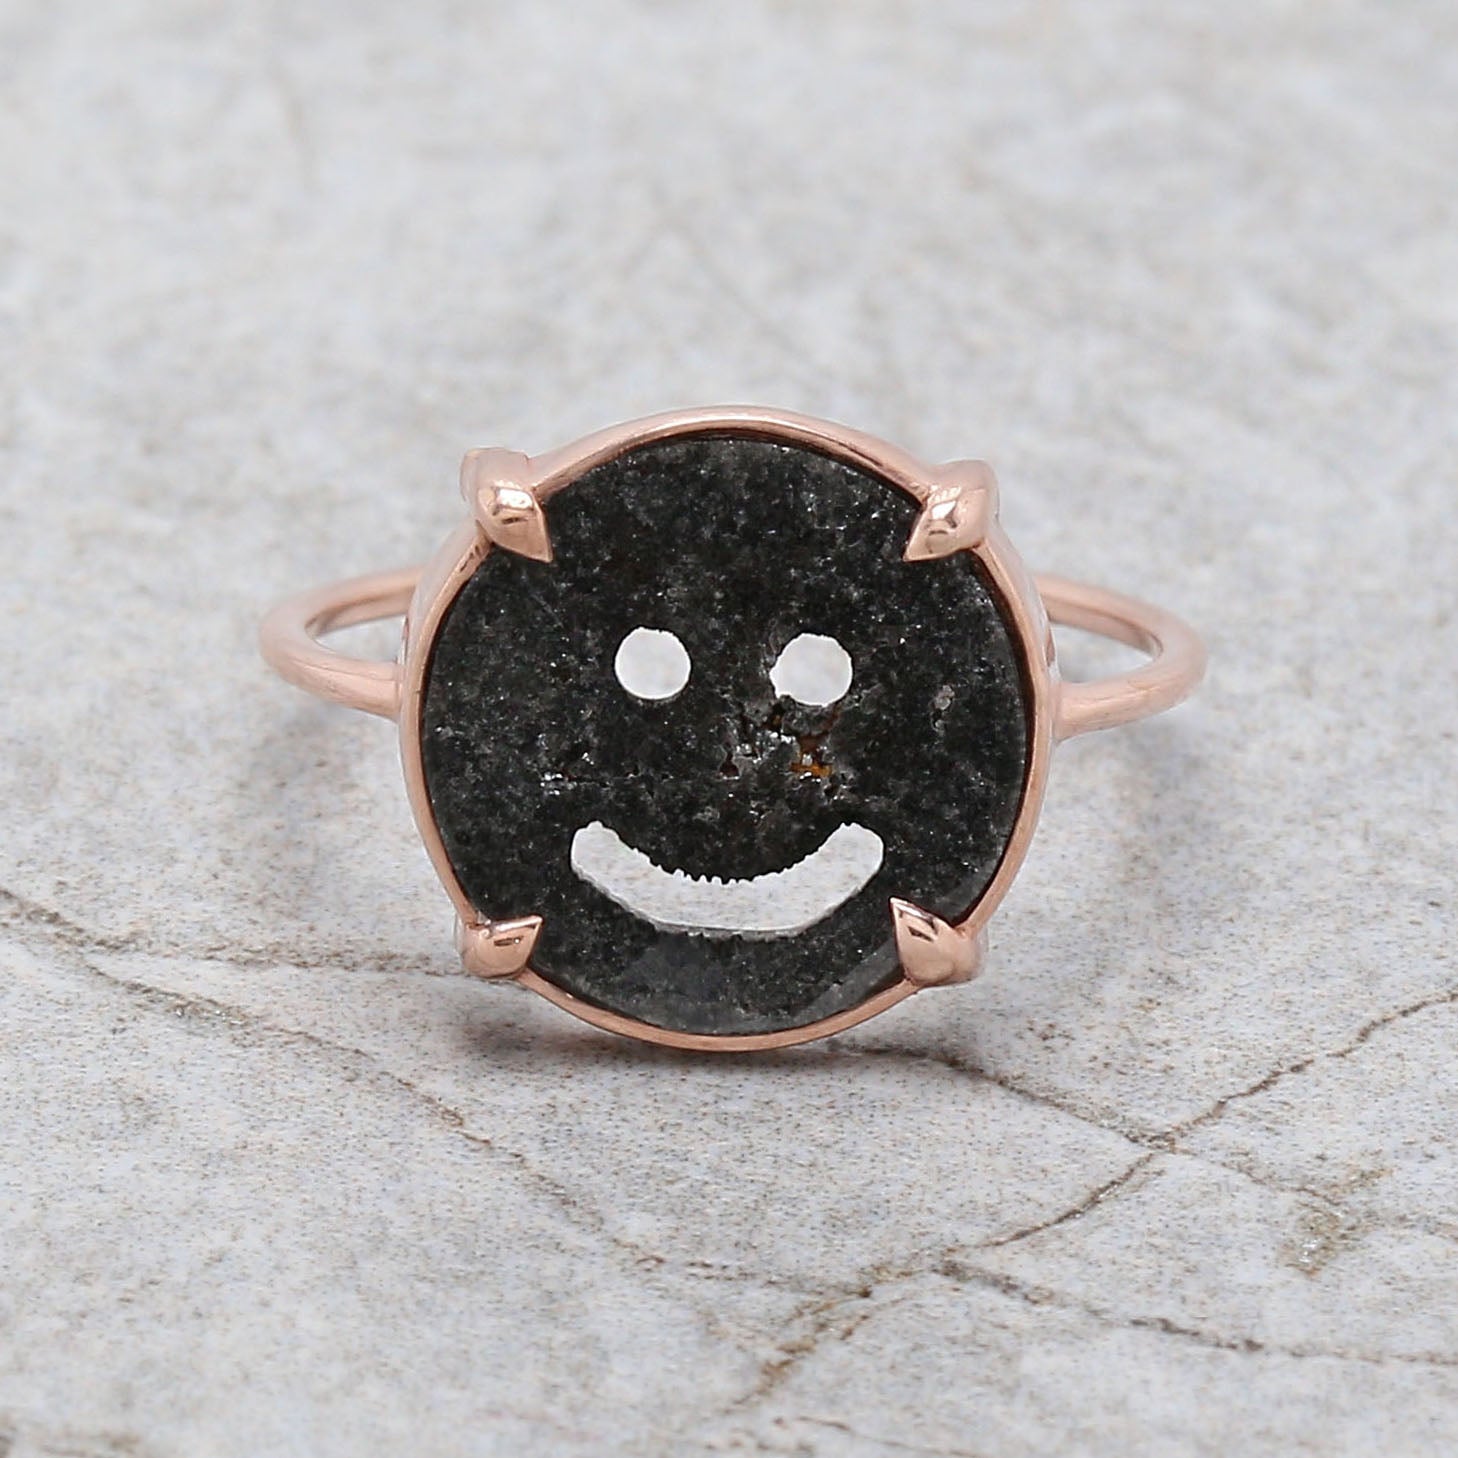 Smiley Face Black Color Diamond Ring Engagement Wedding Gift Ring14K Solid Rose White Yellow Gold Ring 1.41 CT KDK2331